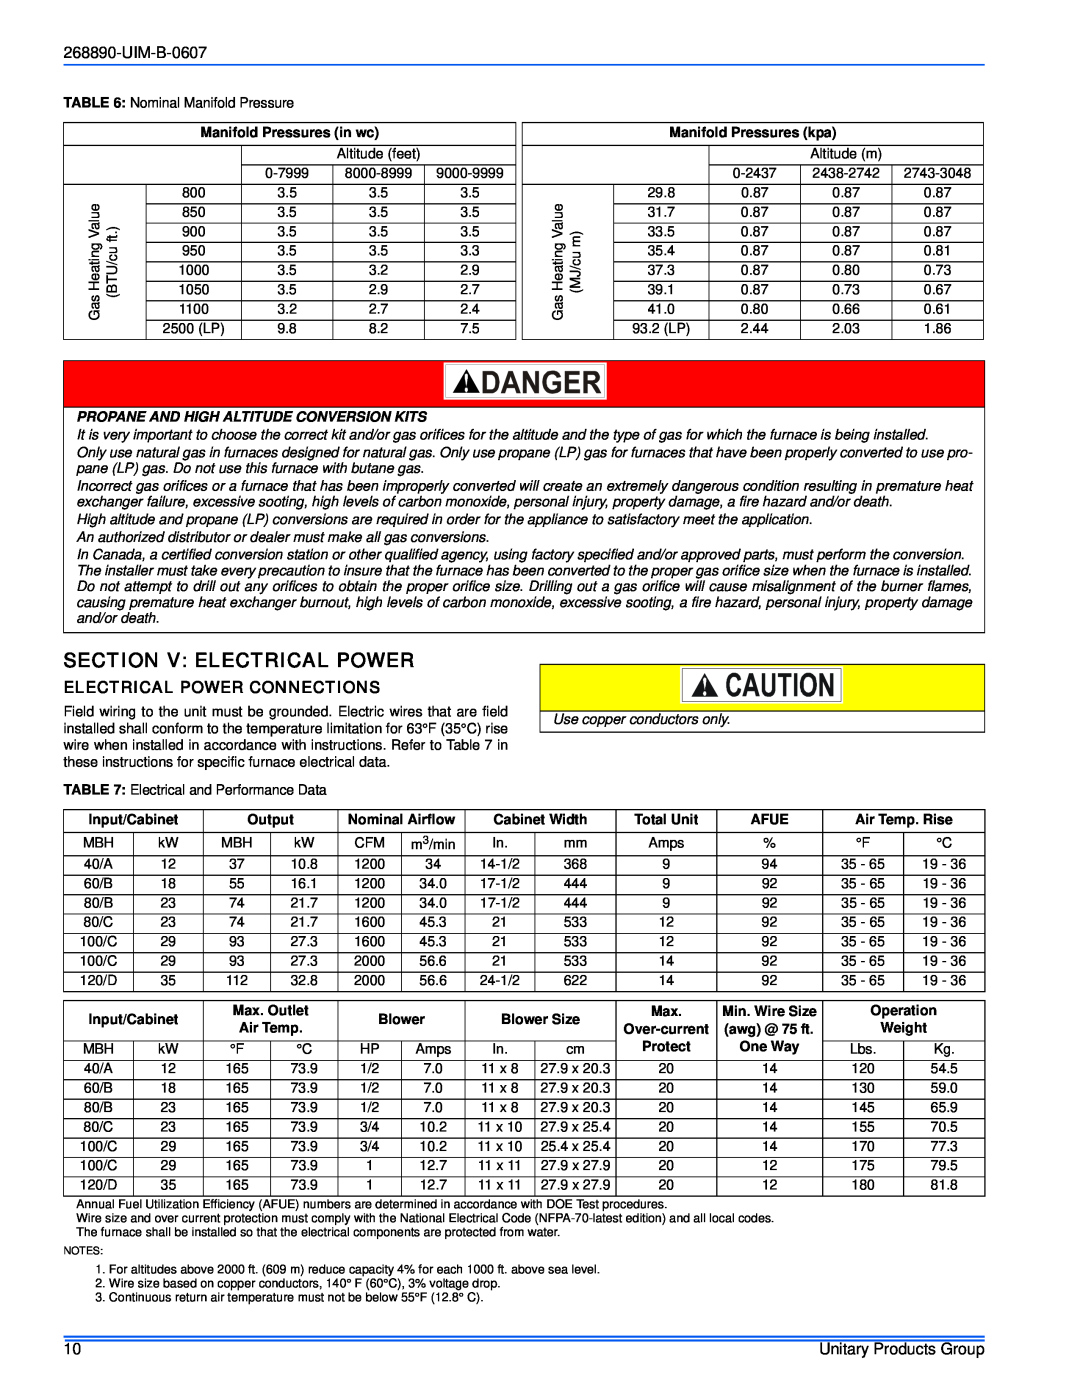 York GY9S*DH, GM9S*DH, GF9S*DH installation manual Section V Electrical Power, UIM-B-0607, Electrical Power Connections 